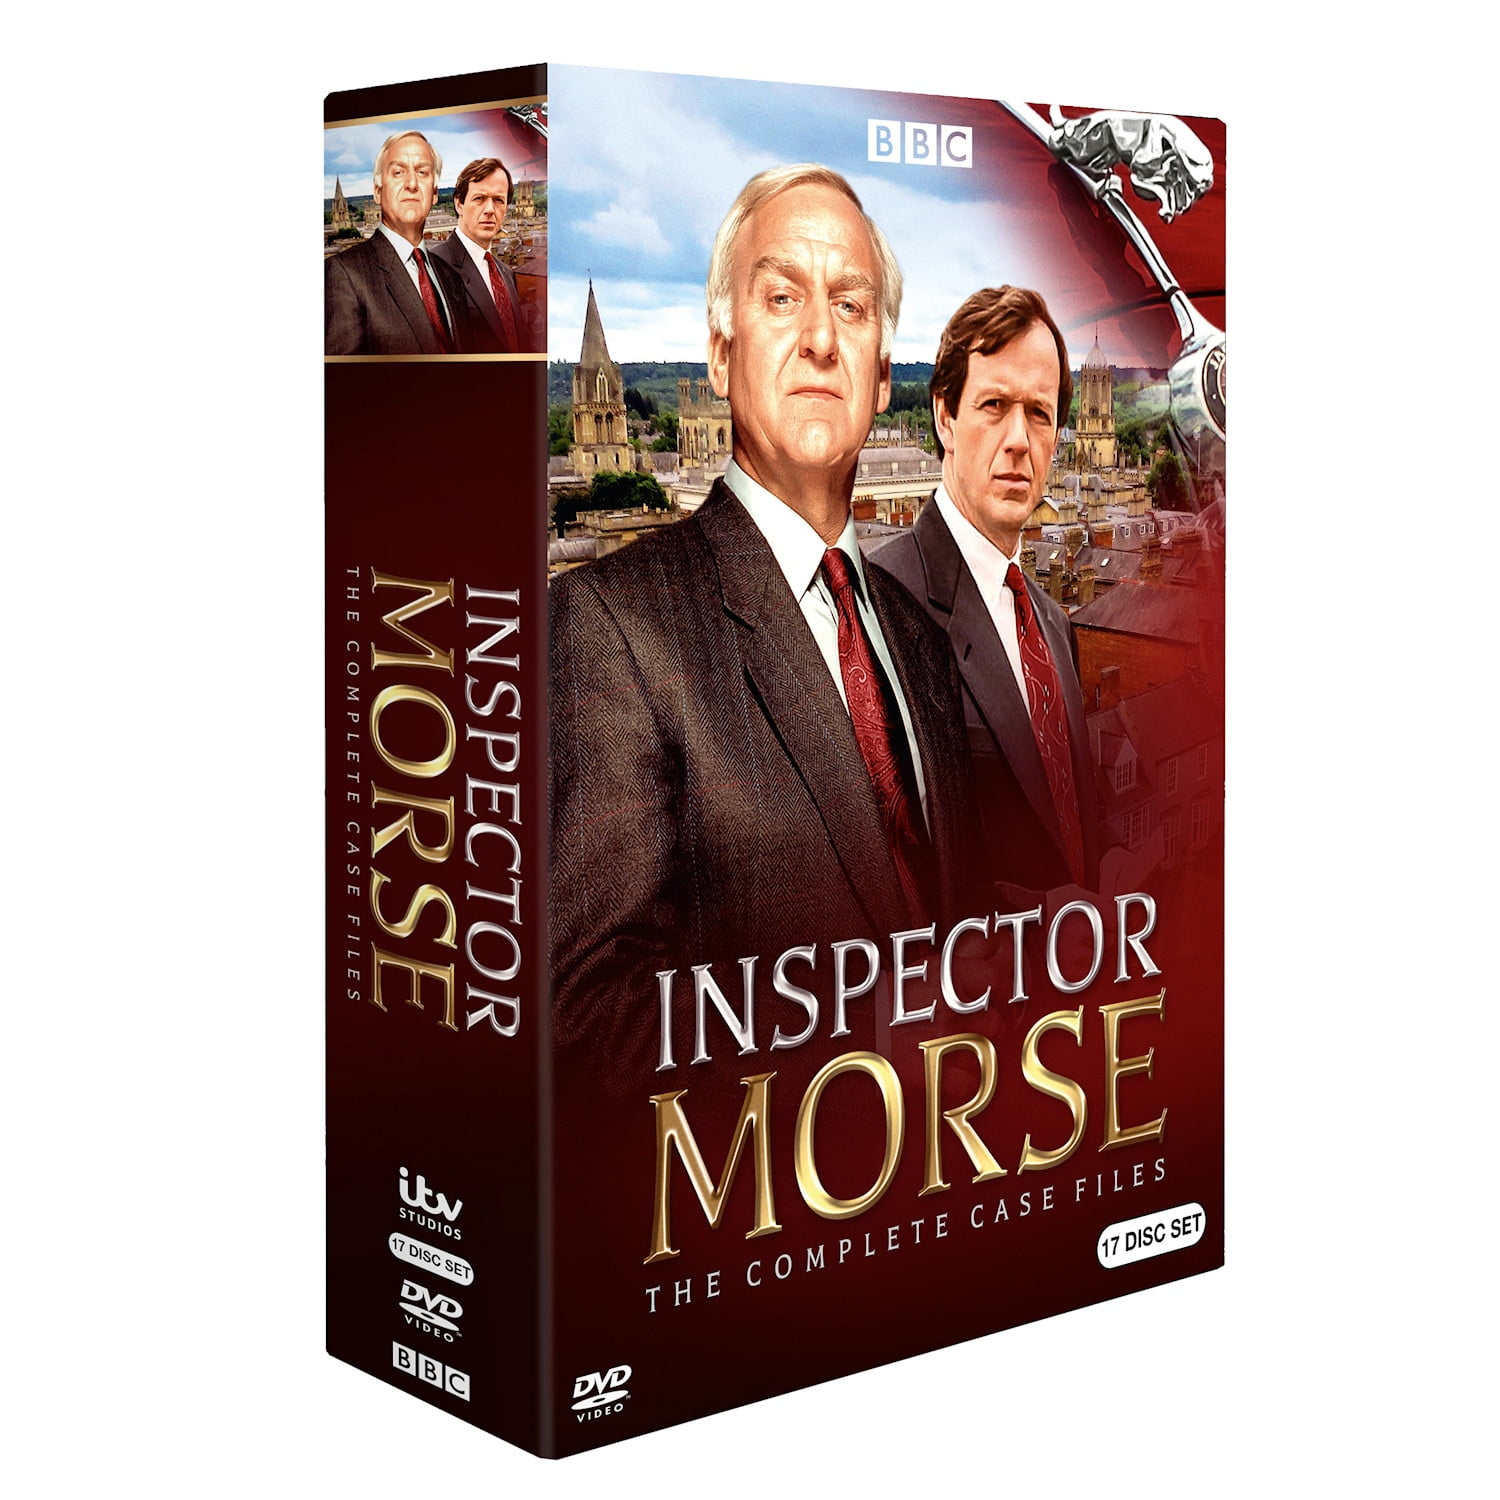 Inspector Morse: The Complete Series DVD Boxed Set - Region 1 (US & Canada)